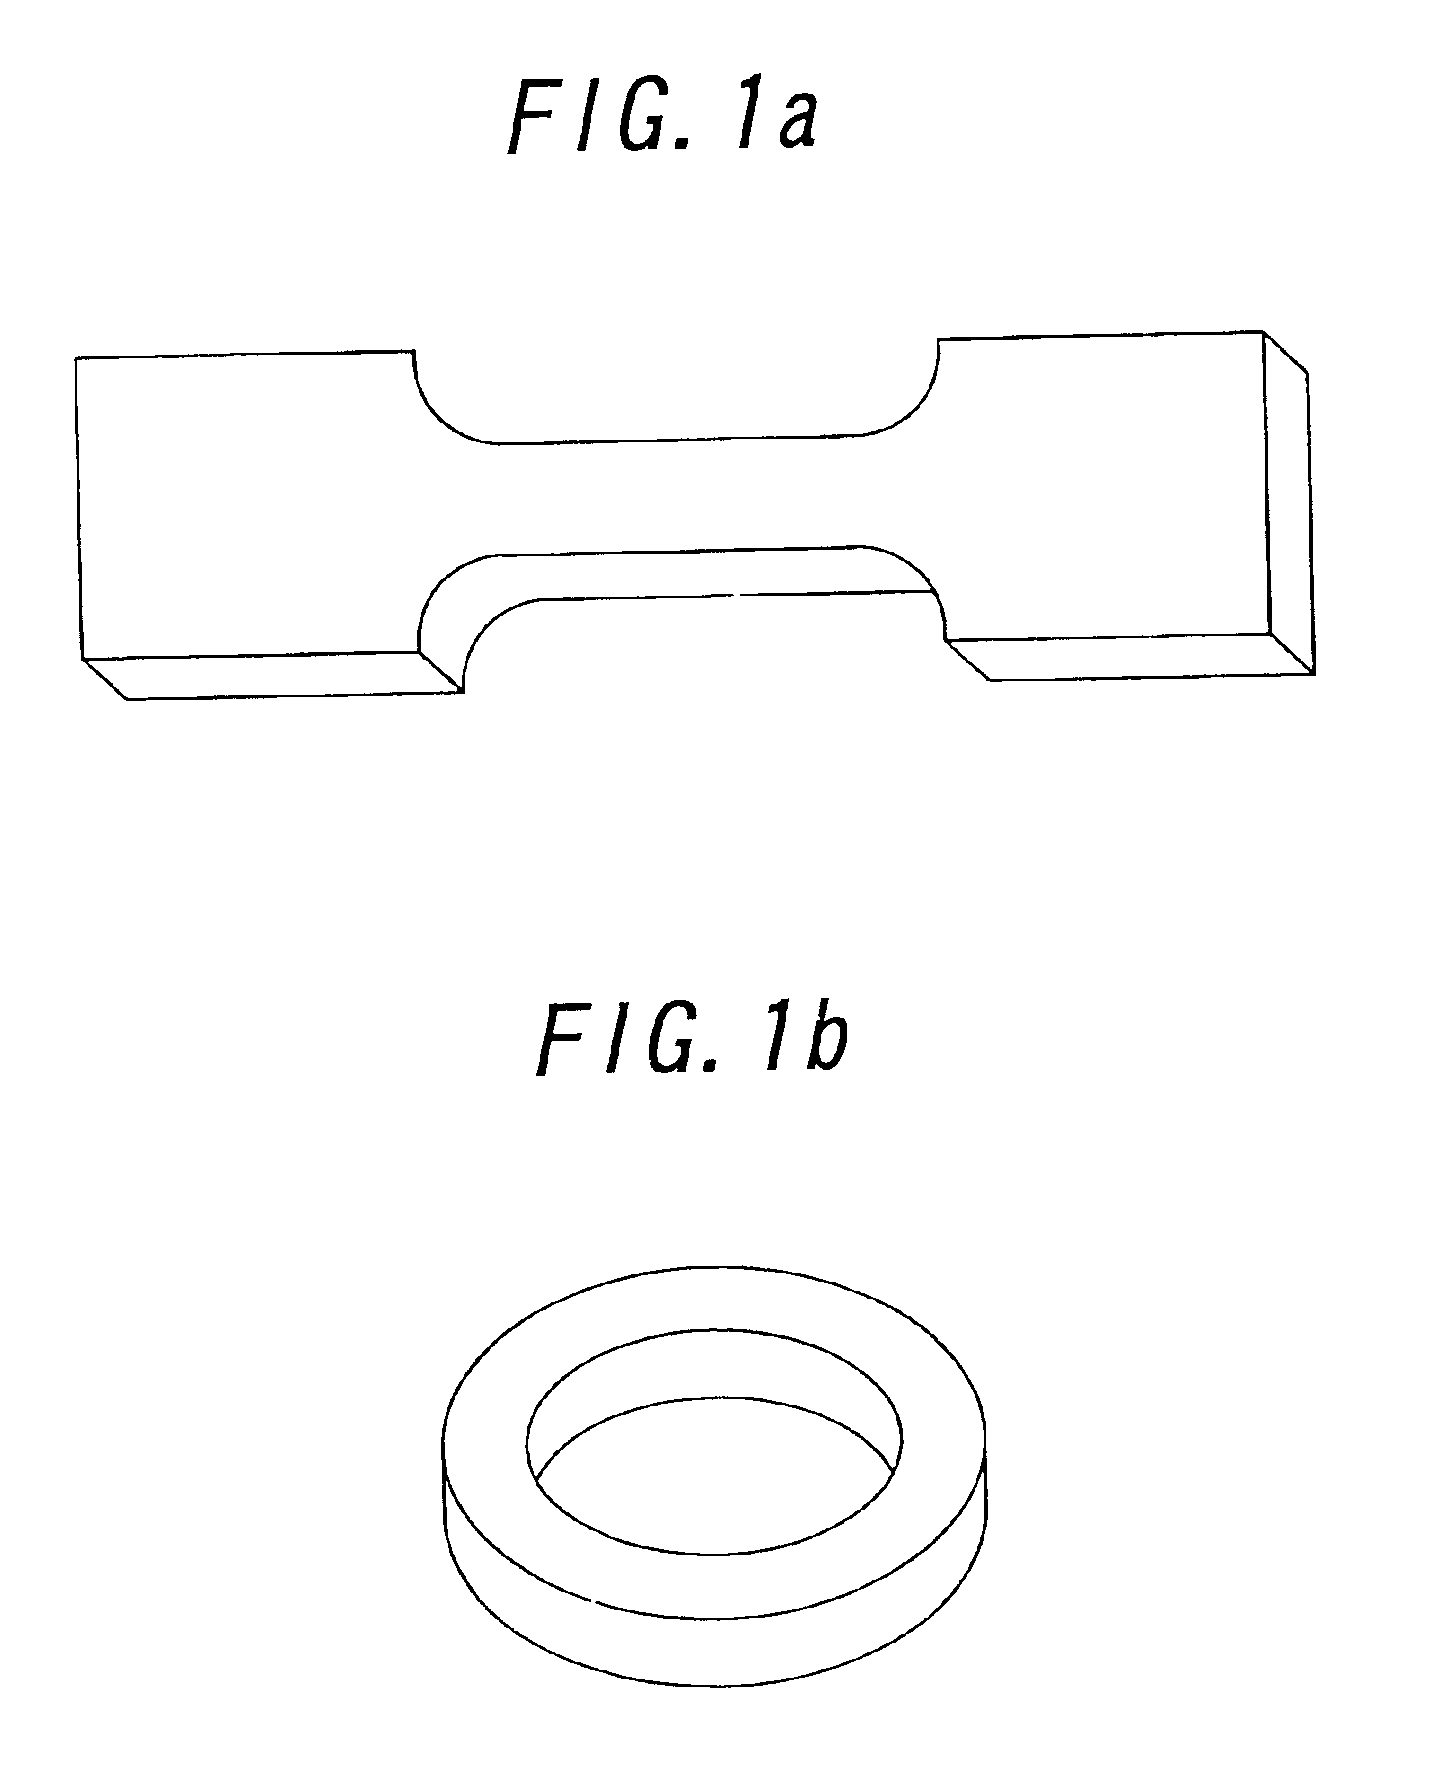 Method for nondestructively evaluating aged deterioration of ferromagnetic construction materials